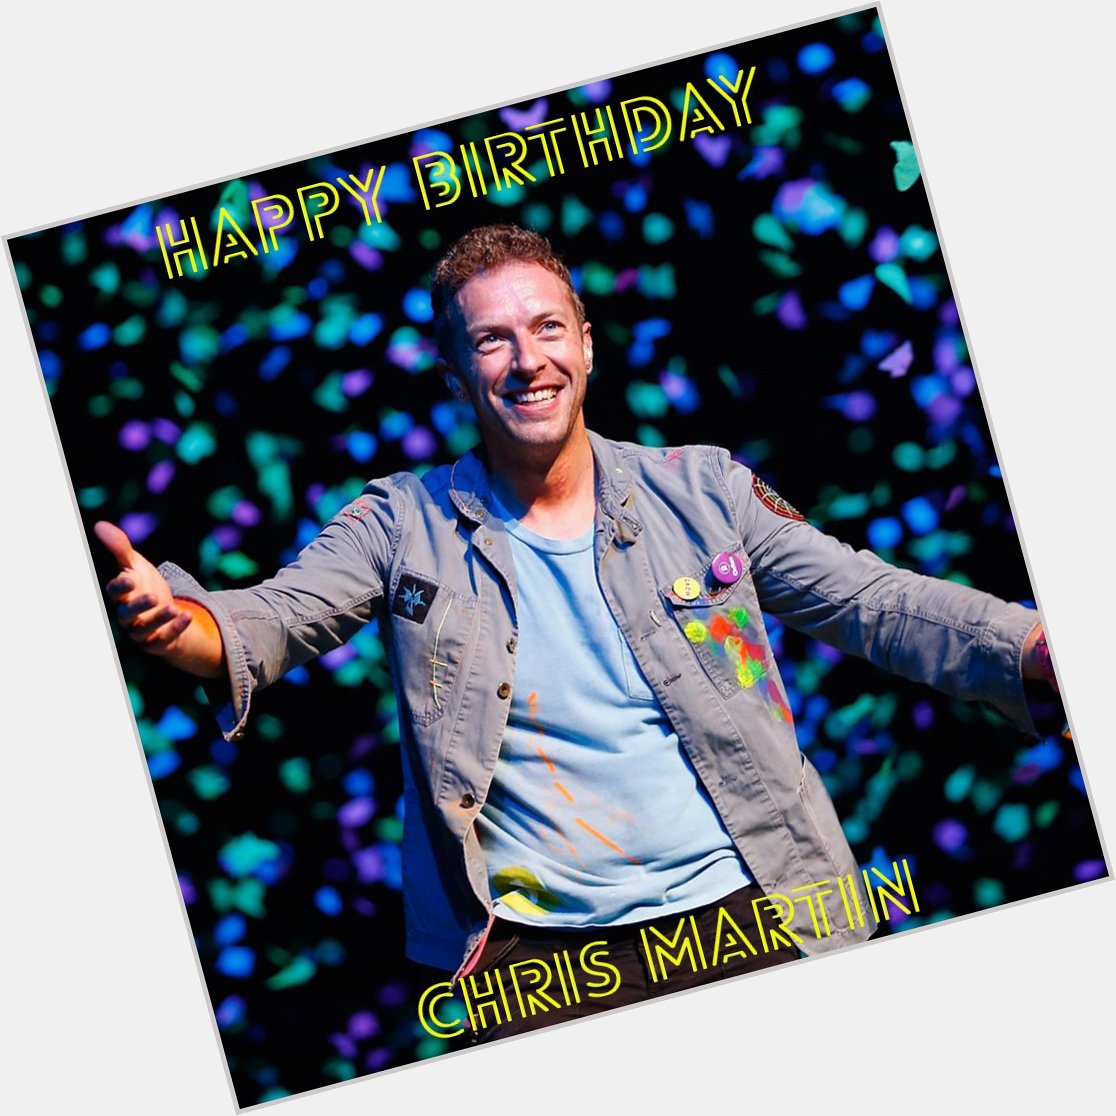 Chris Martin is seeing a sky full of stars today! Happy 40th birthday, Chris! 